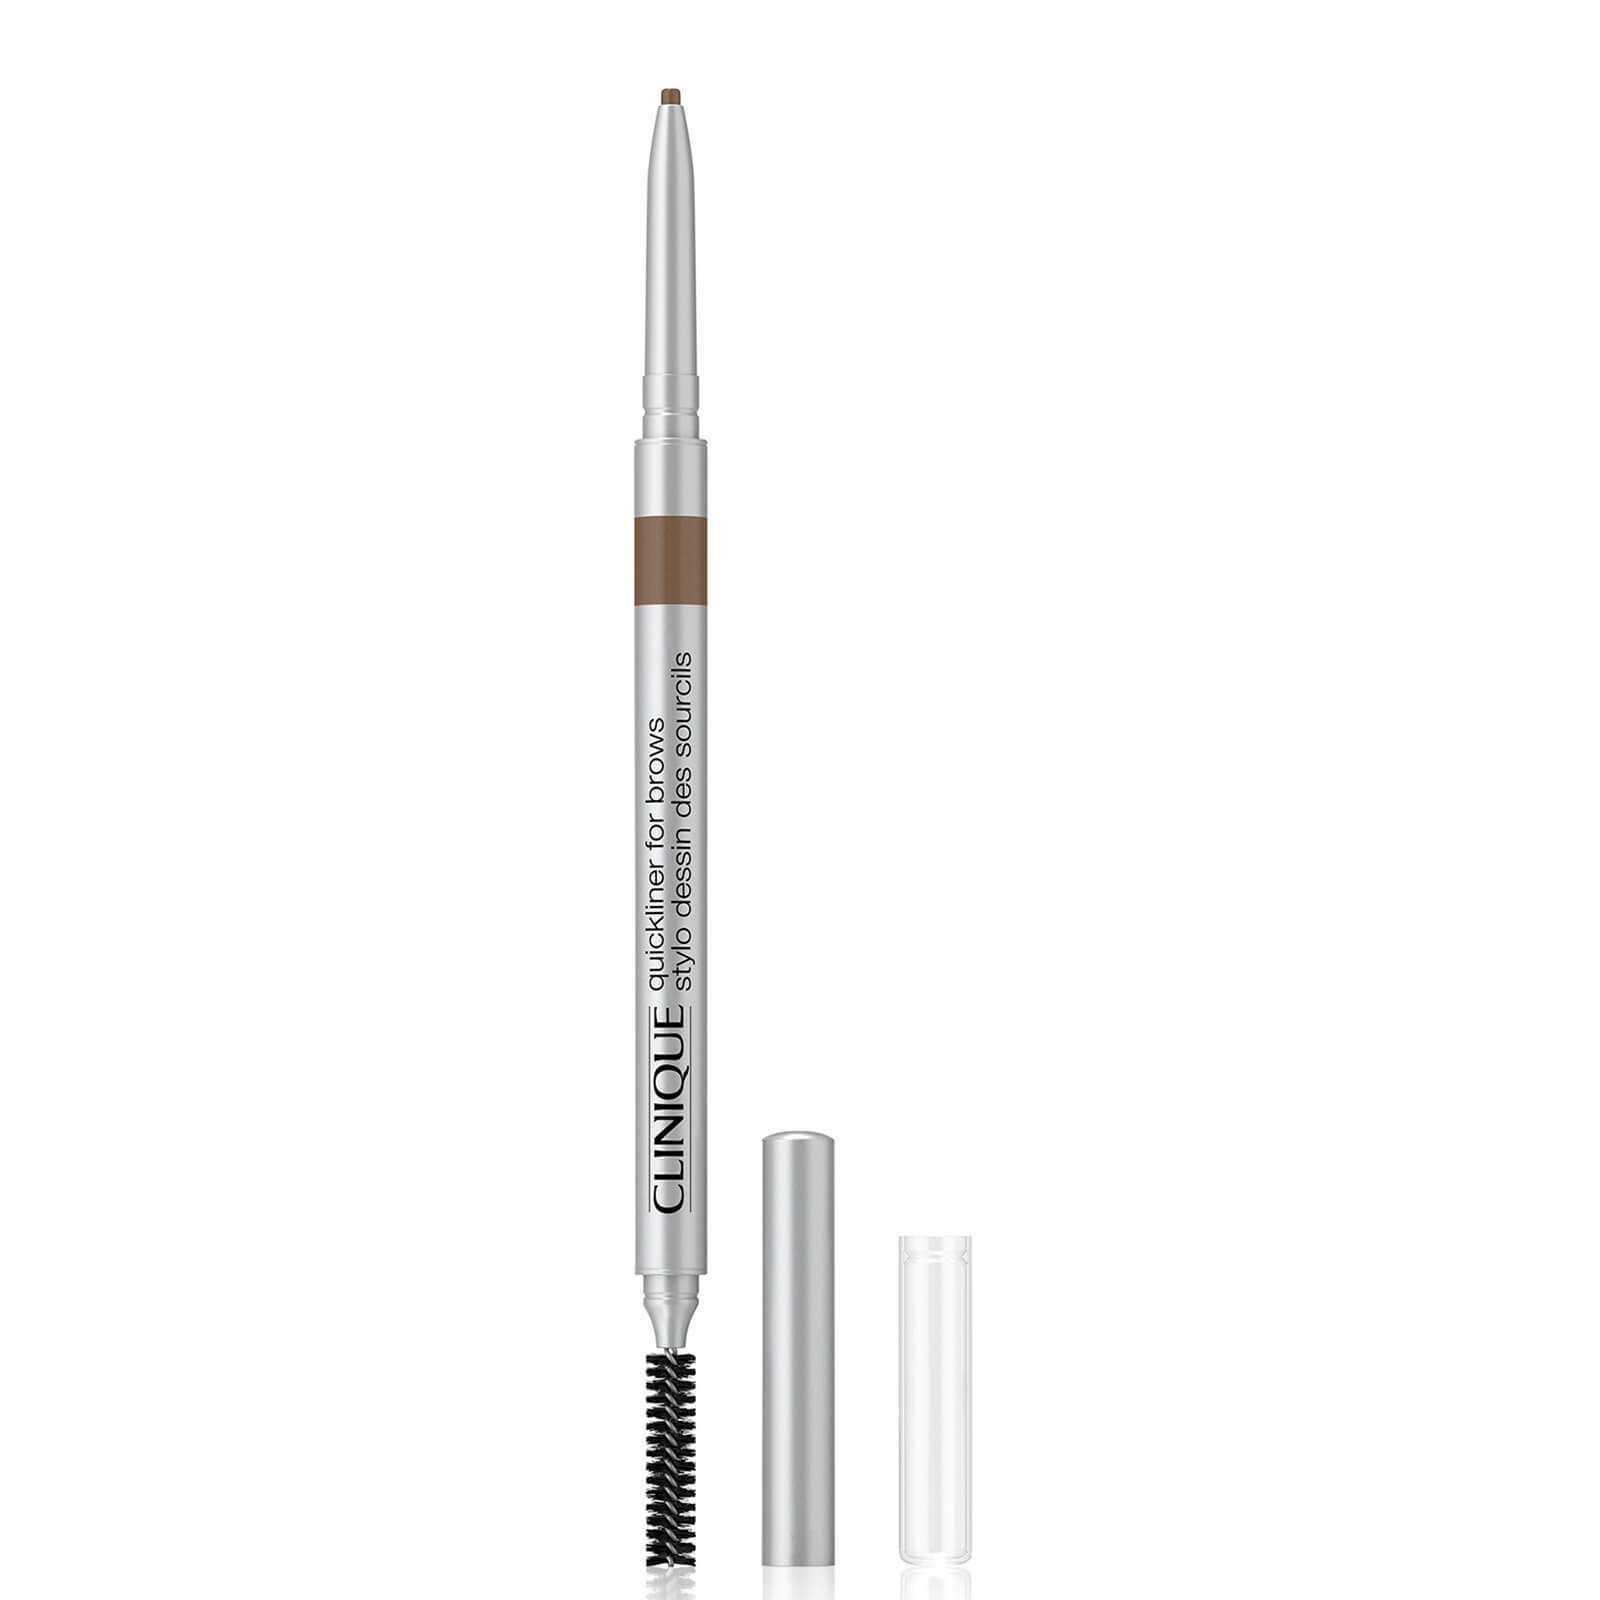 Clinique Quickliner for Brows 0.06g (Various Shades) - Soft Chestnut